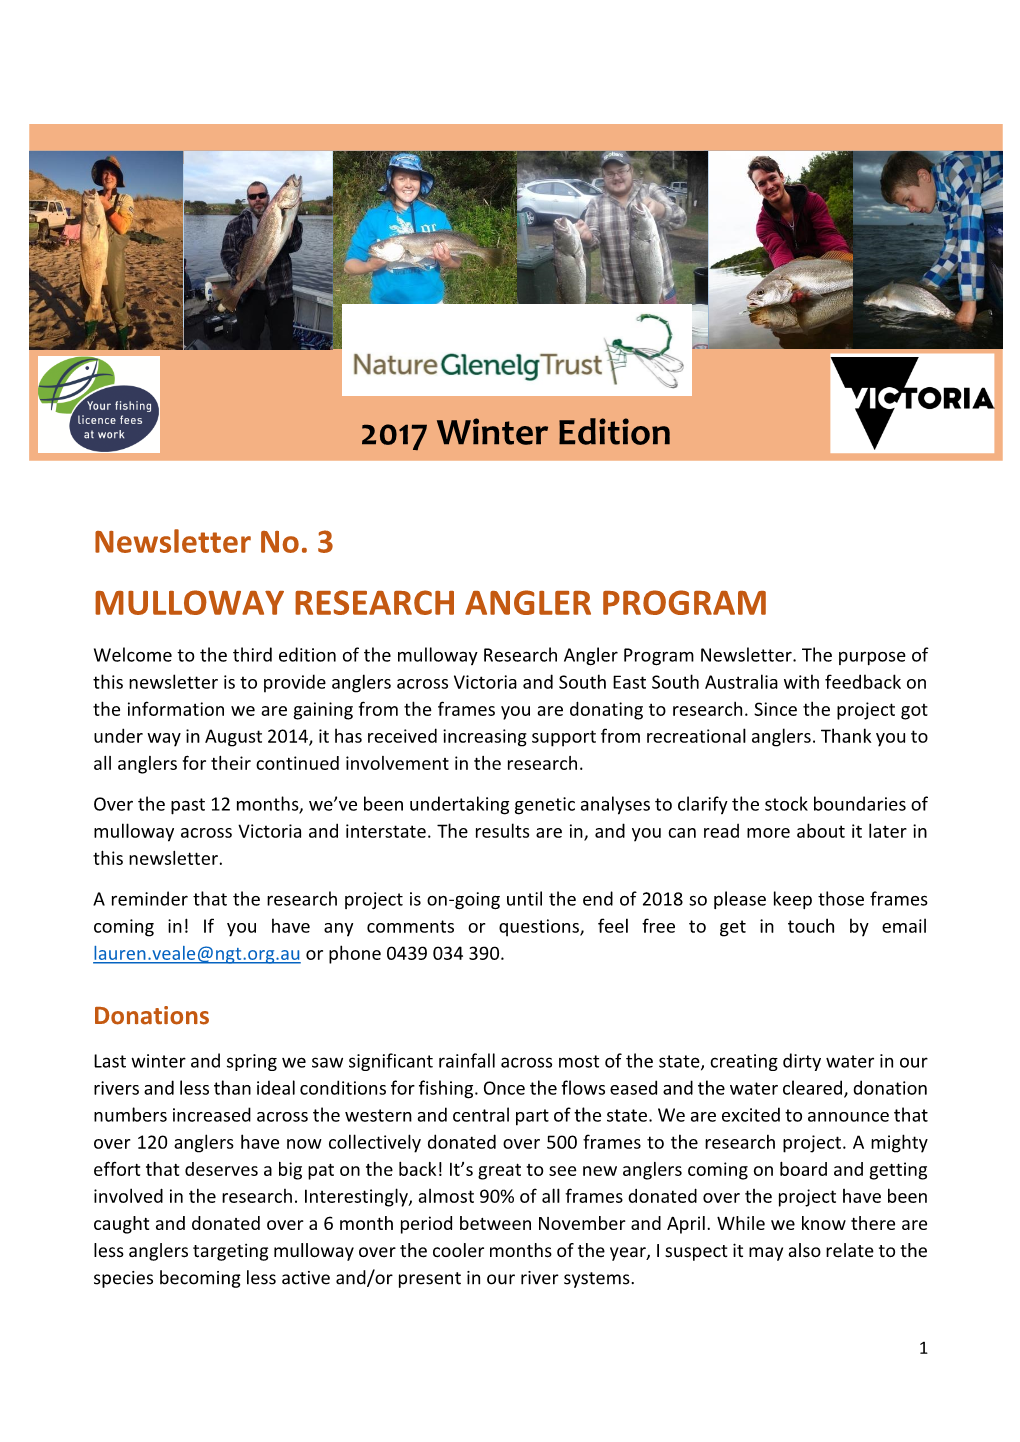 MULLOWAY RESEARCH ANGLER PROGRAM 2017 Winter Edition